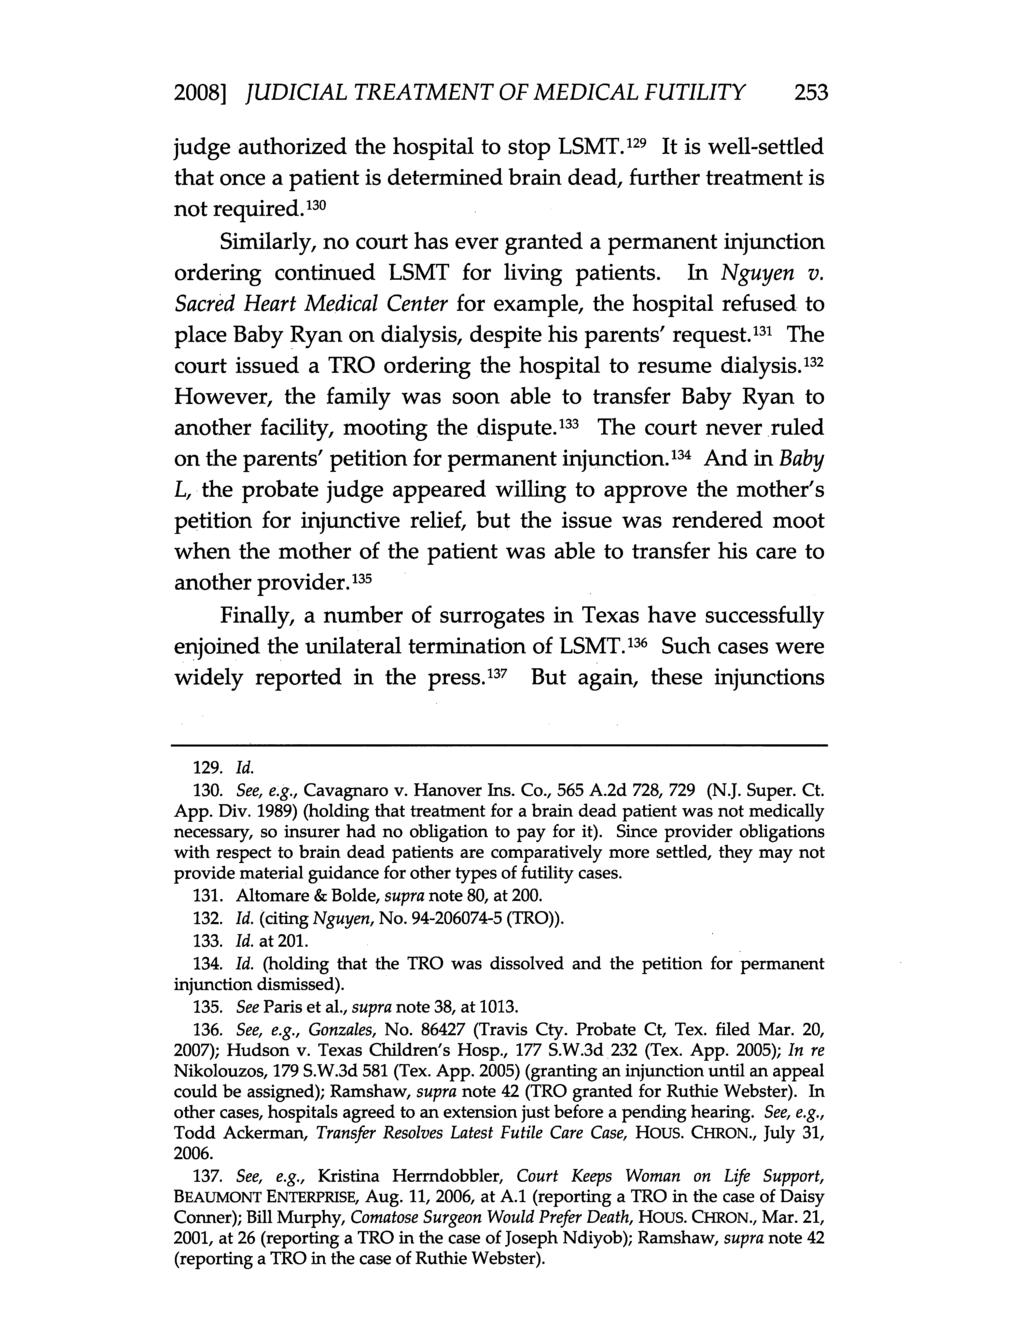 2008] JUDICIAL TREATMENT OF MEDICAL FUTILITY 253 judge authorized the hospital to stop LSMT.129 It is well-settled that once a patient is determined brain dead, further treatment is not required.